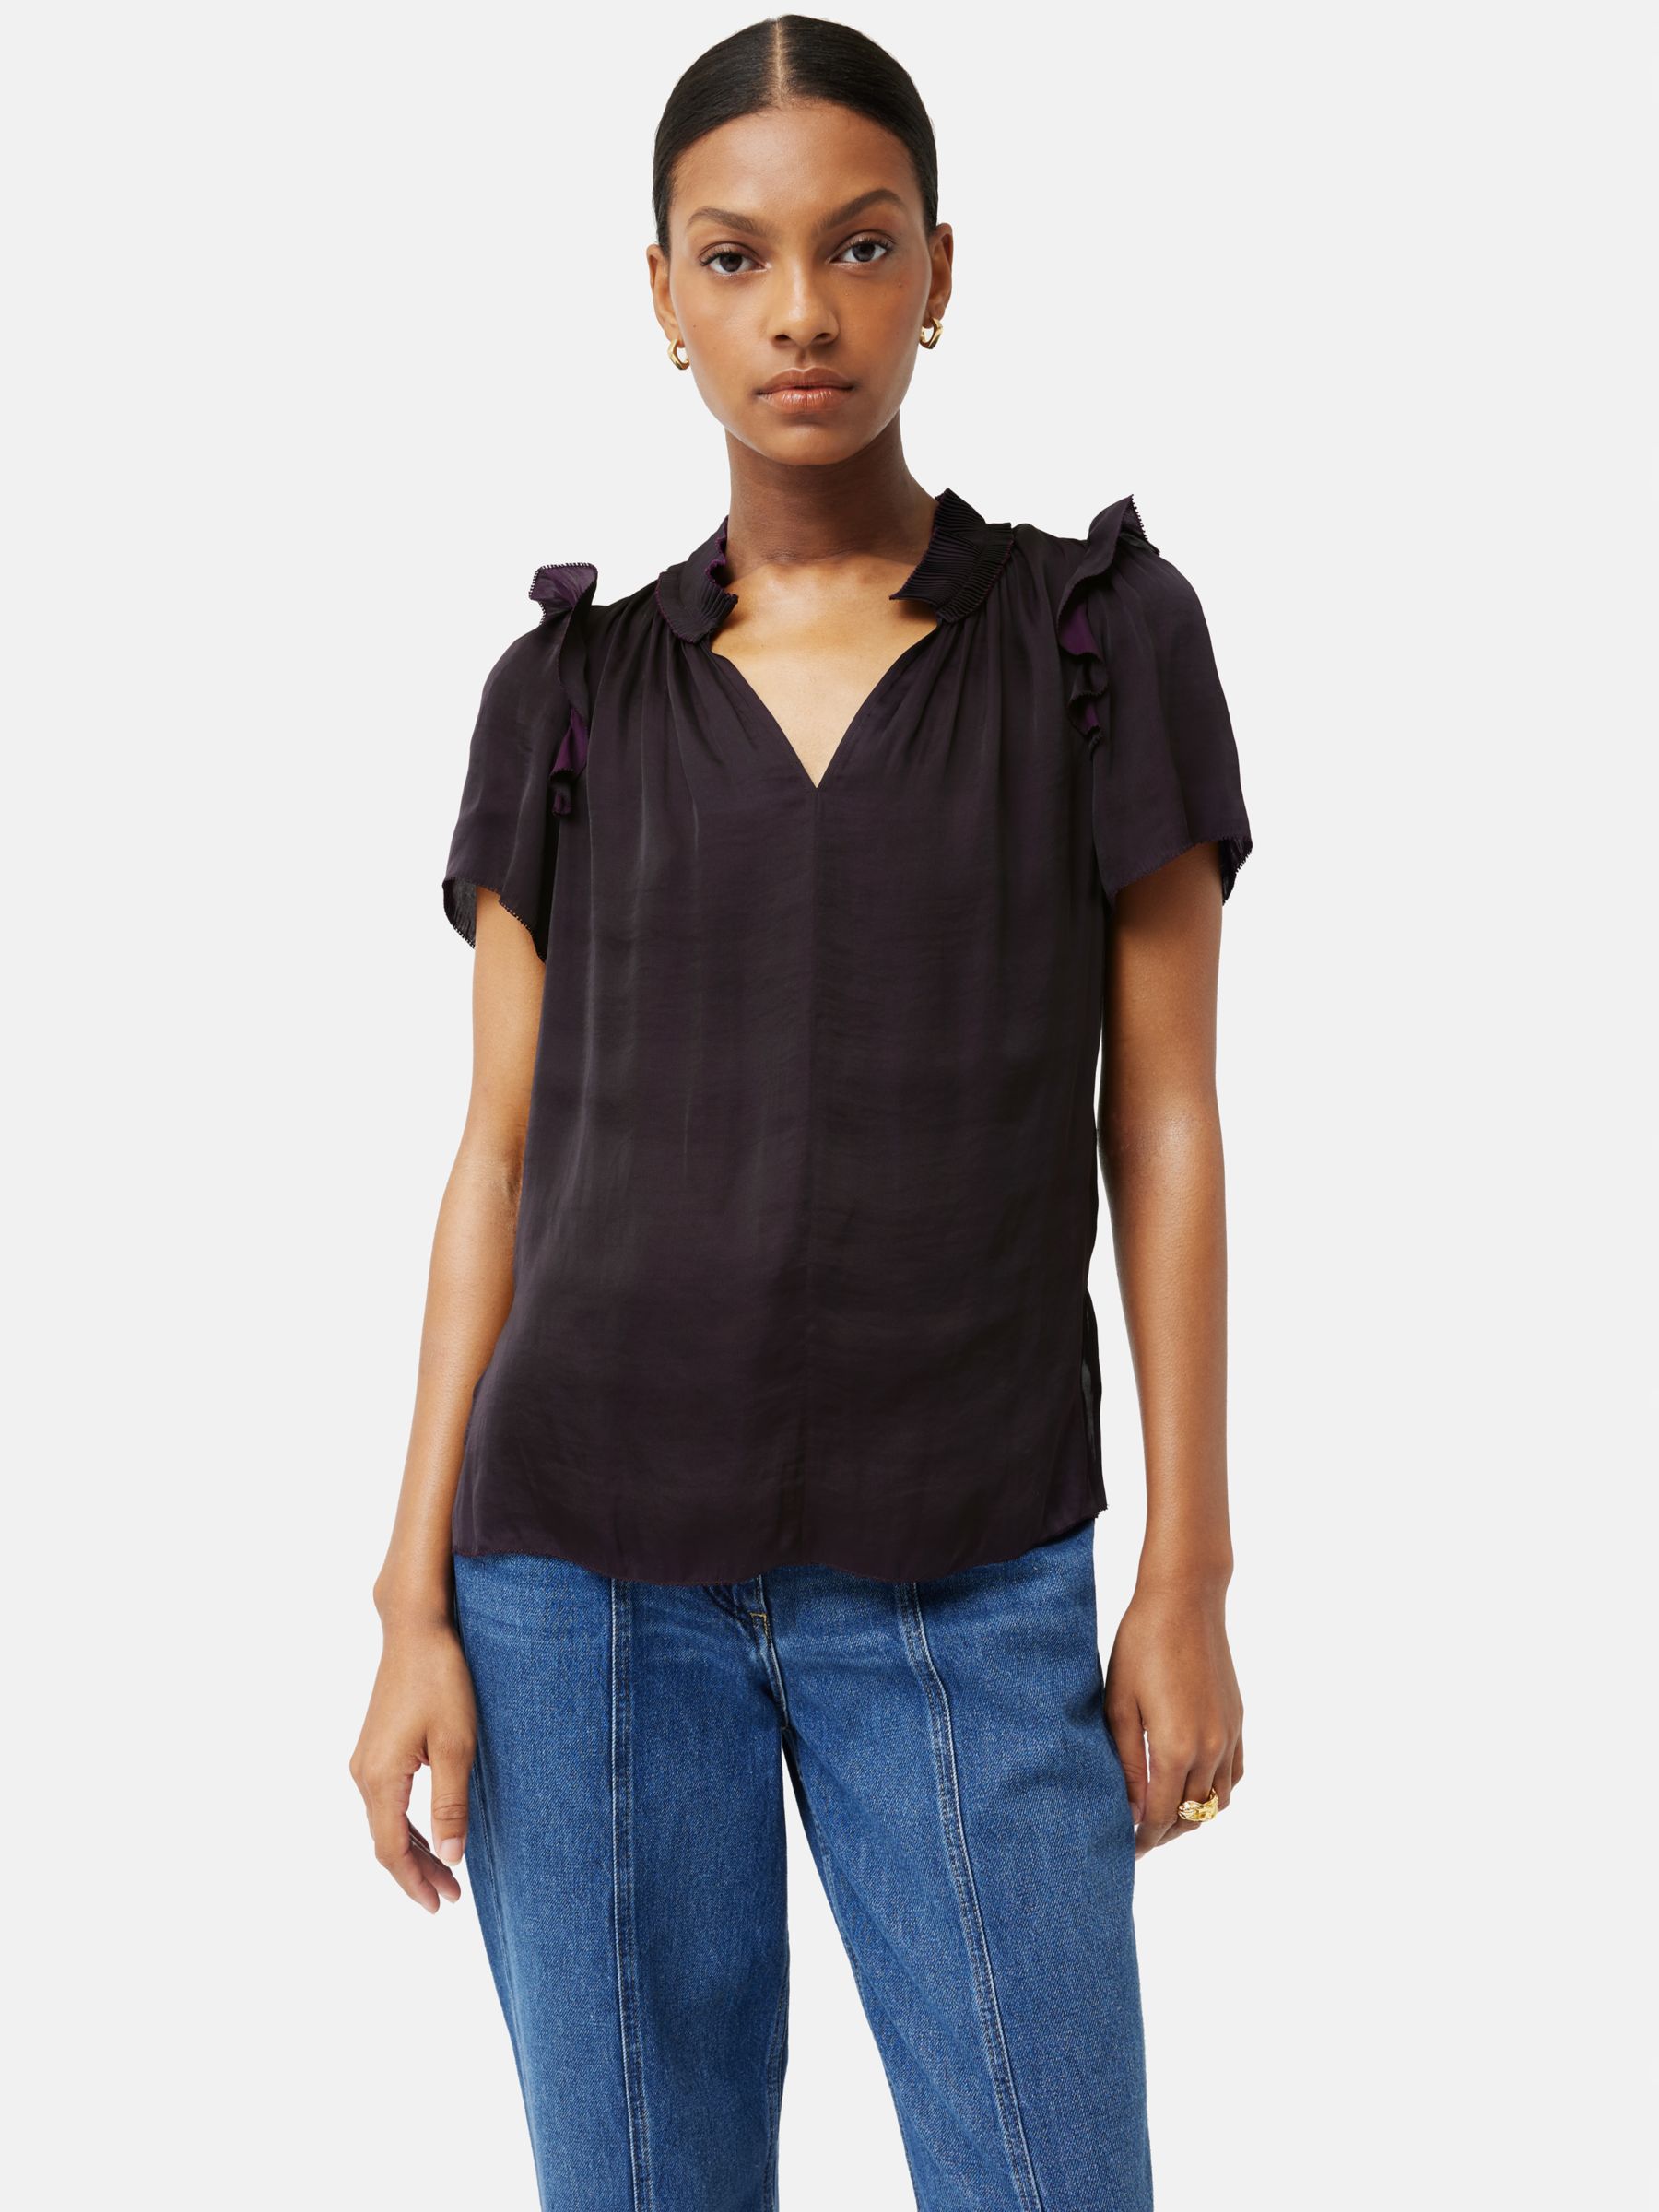 Jigsaw Recycled Satin Frill Trim Blouse, Purple at John Lewis & Partners